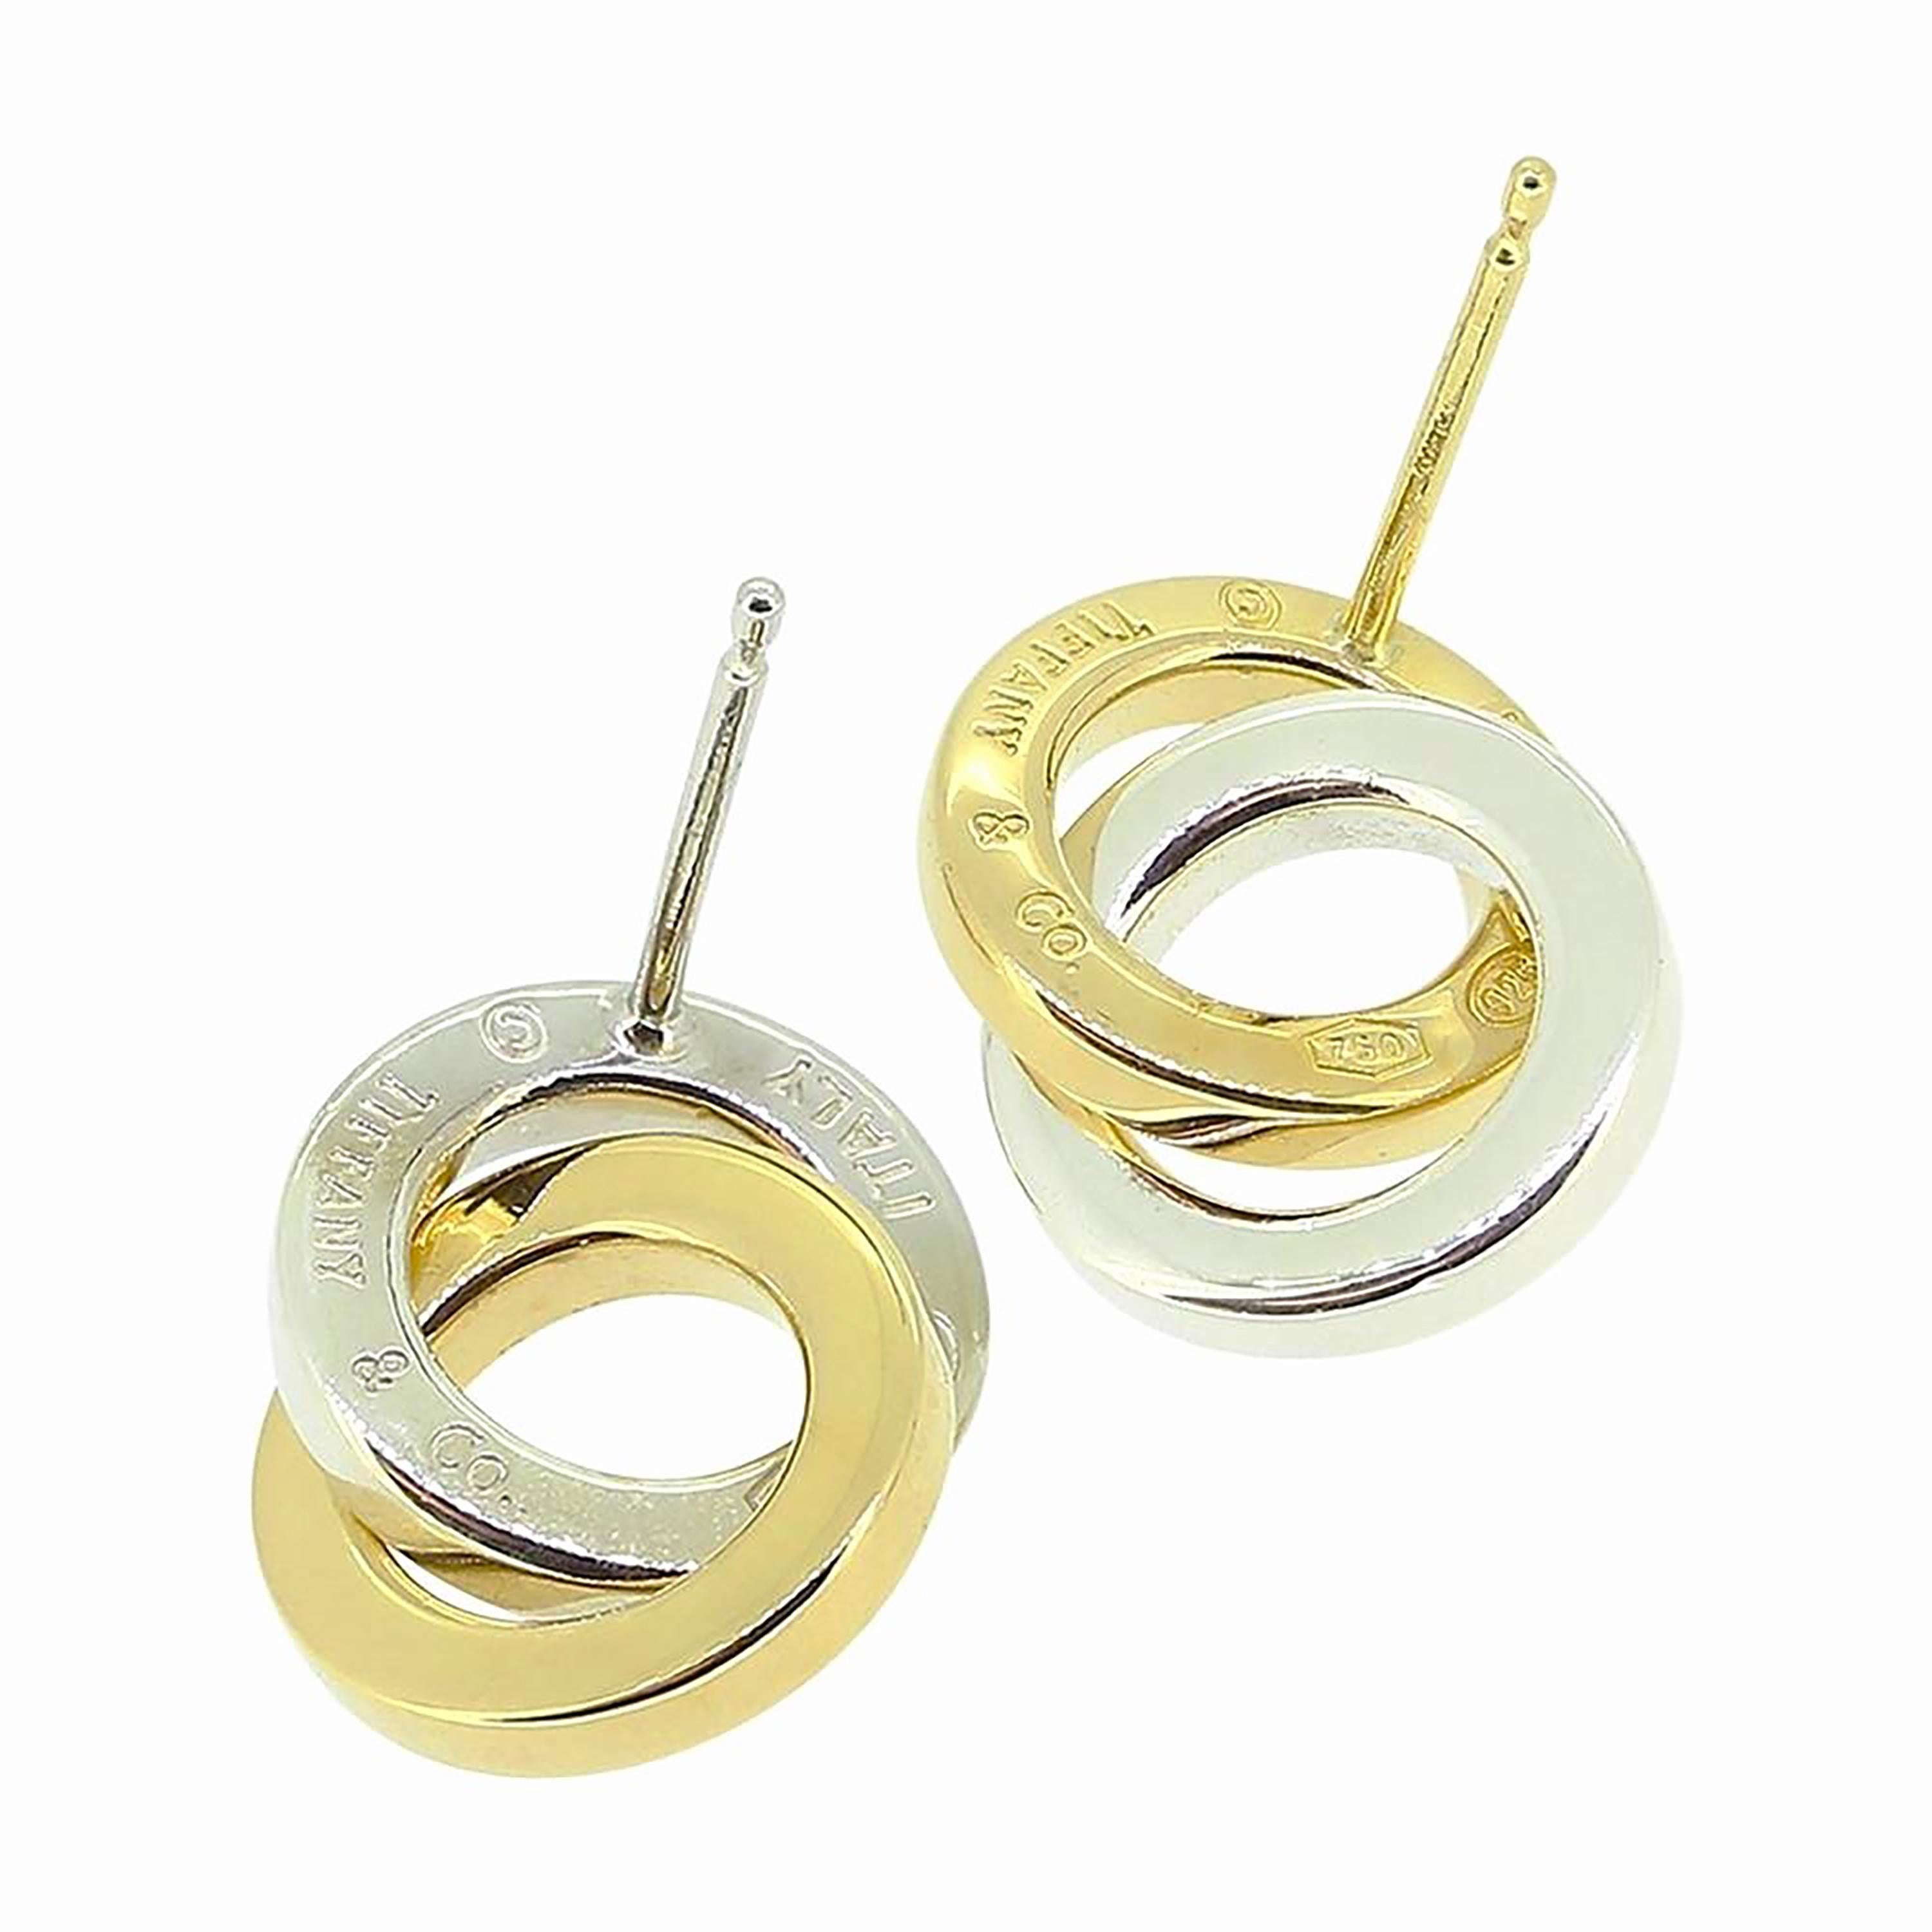 Tiffany Co Double 18 Karat Yellow Gold and Silver Circle 0.70 Inch Long Earrings For Sale 4